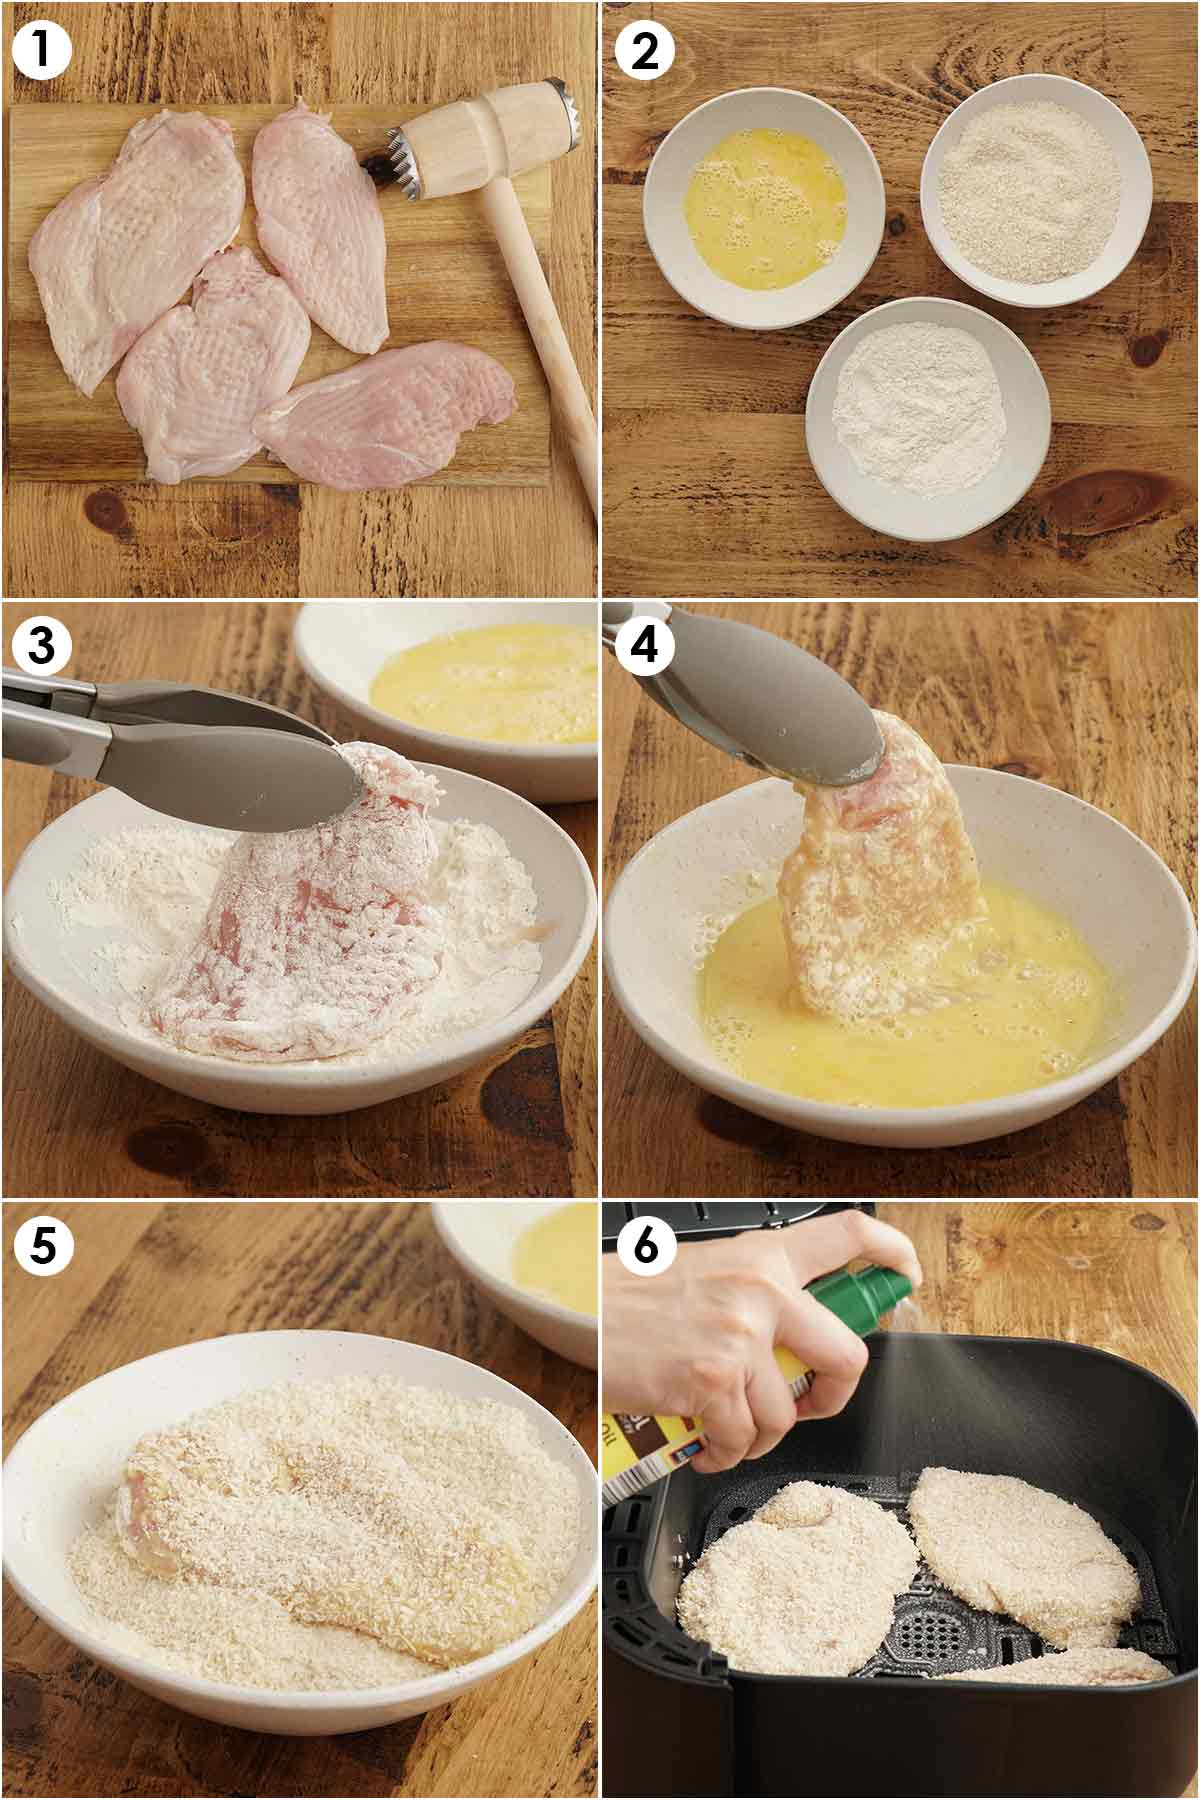 6 image collage showing how to prepare panko fried chicken